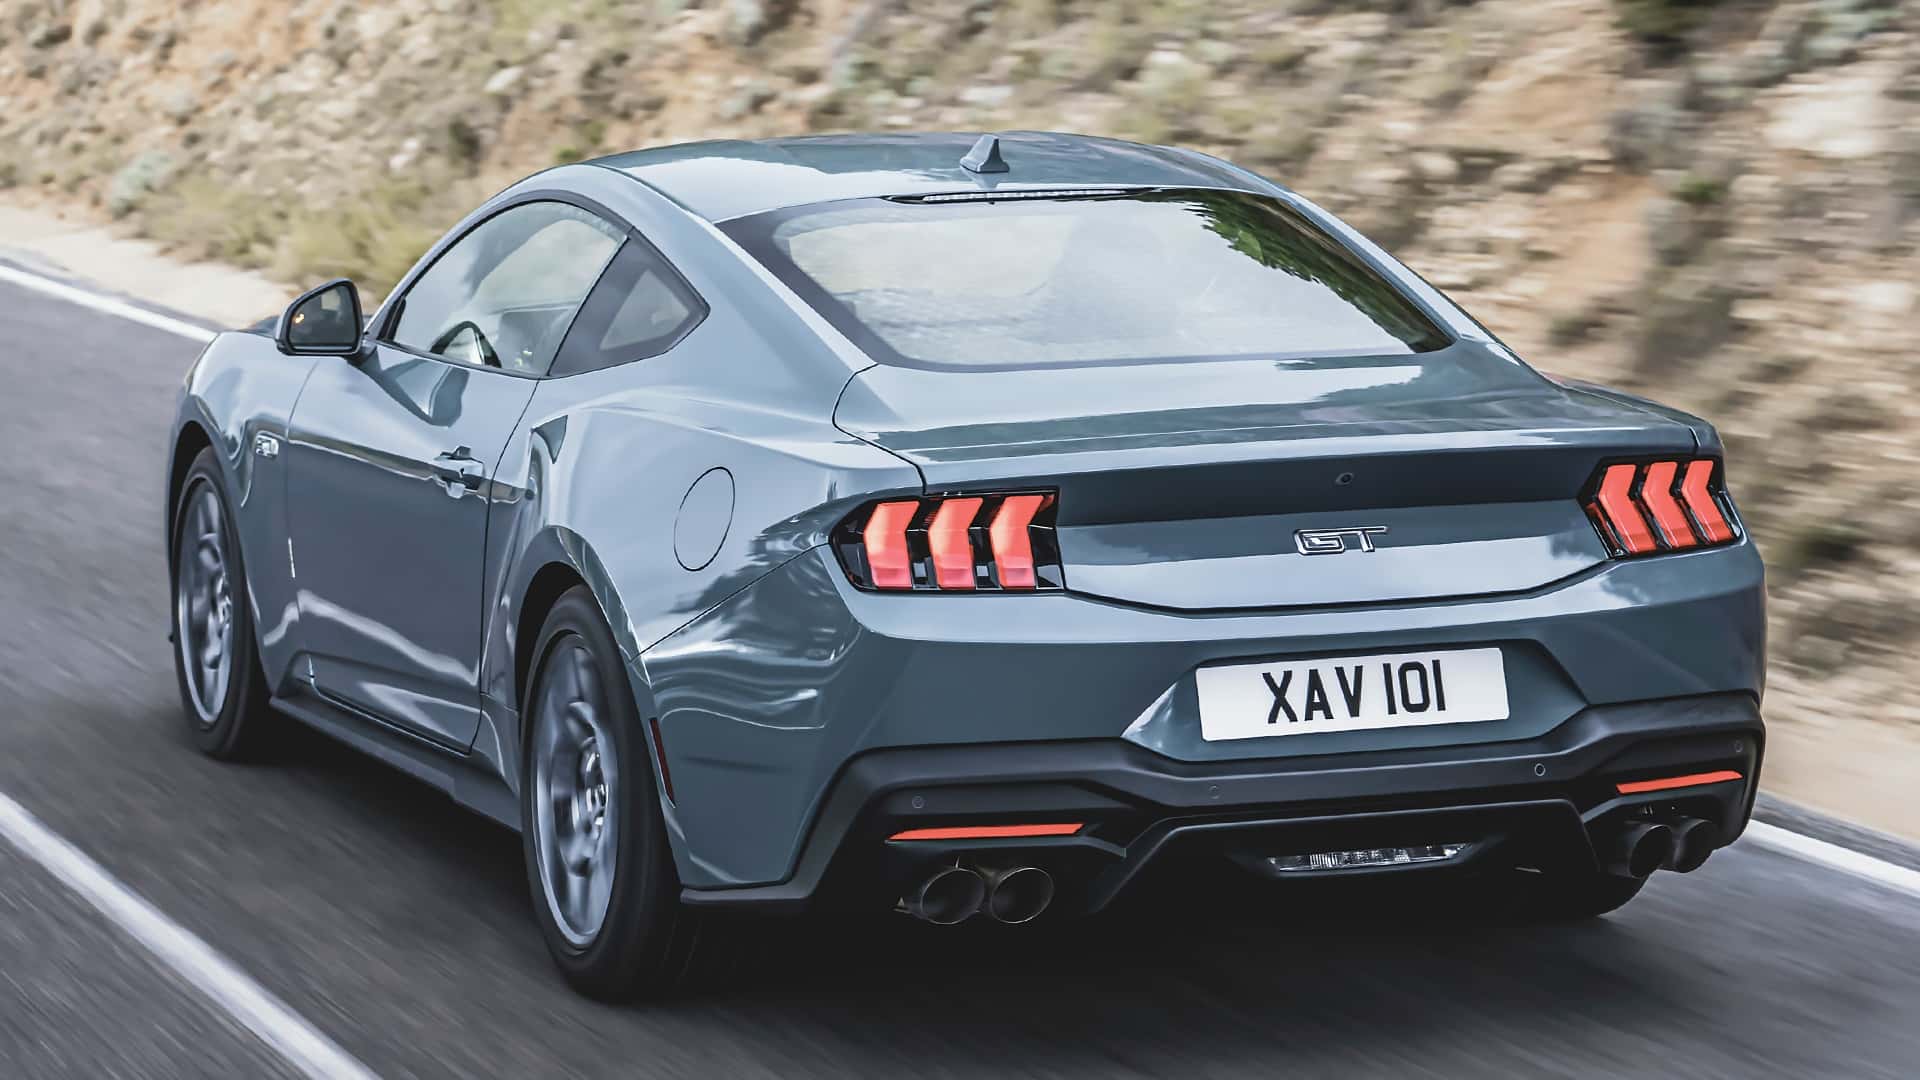 Ford Mustang in Europe Faces 52 HP Reduction Due to Emissions